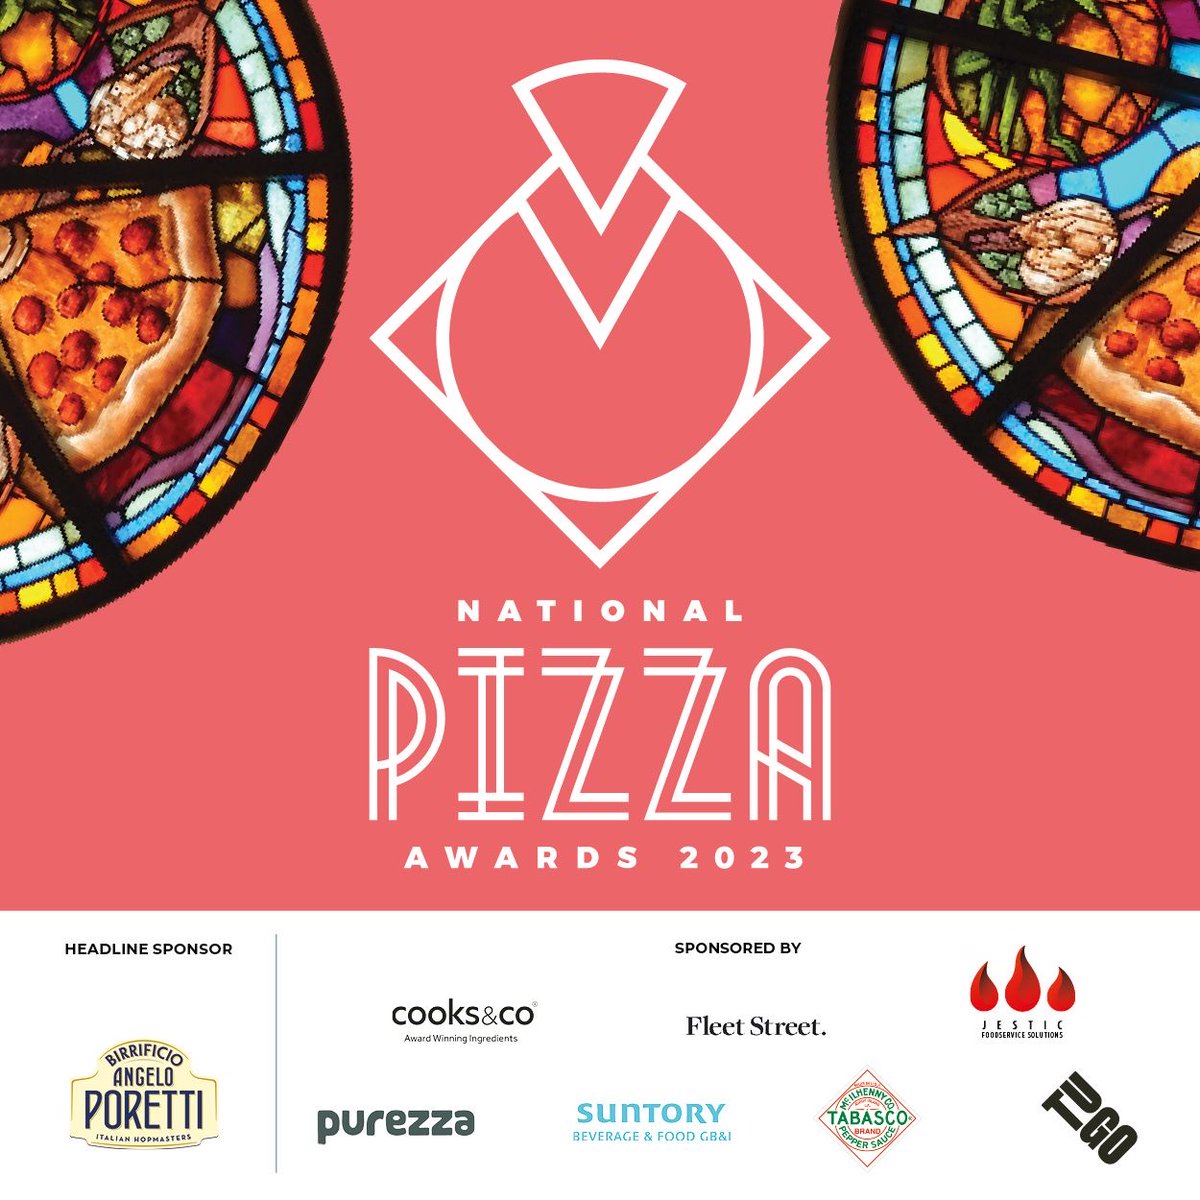 The countdown to the #NationalPizzaAwards live final has officially begun!  And the good news is that you can experience the action-packed event first-hand at London’s Big Penny Social on 21st November. Head to nationalpizzaawards.co.uk and register for free today!